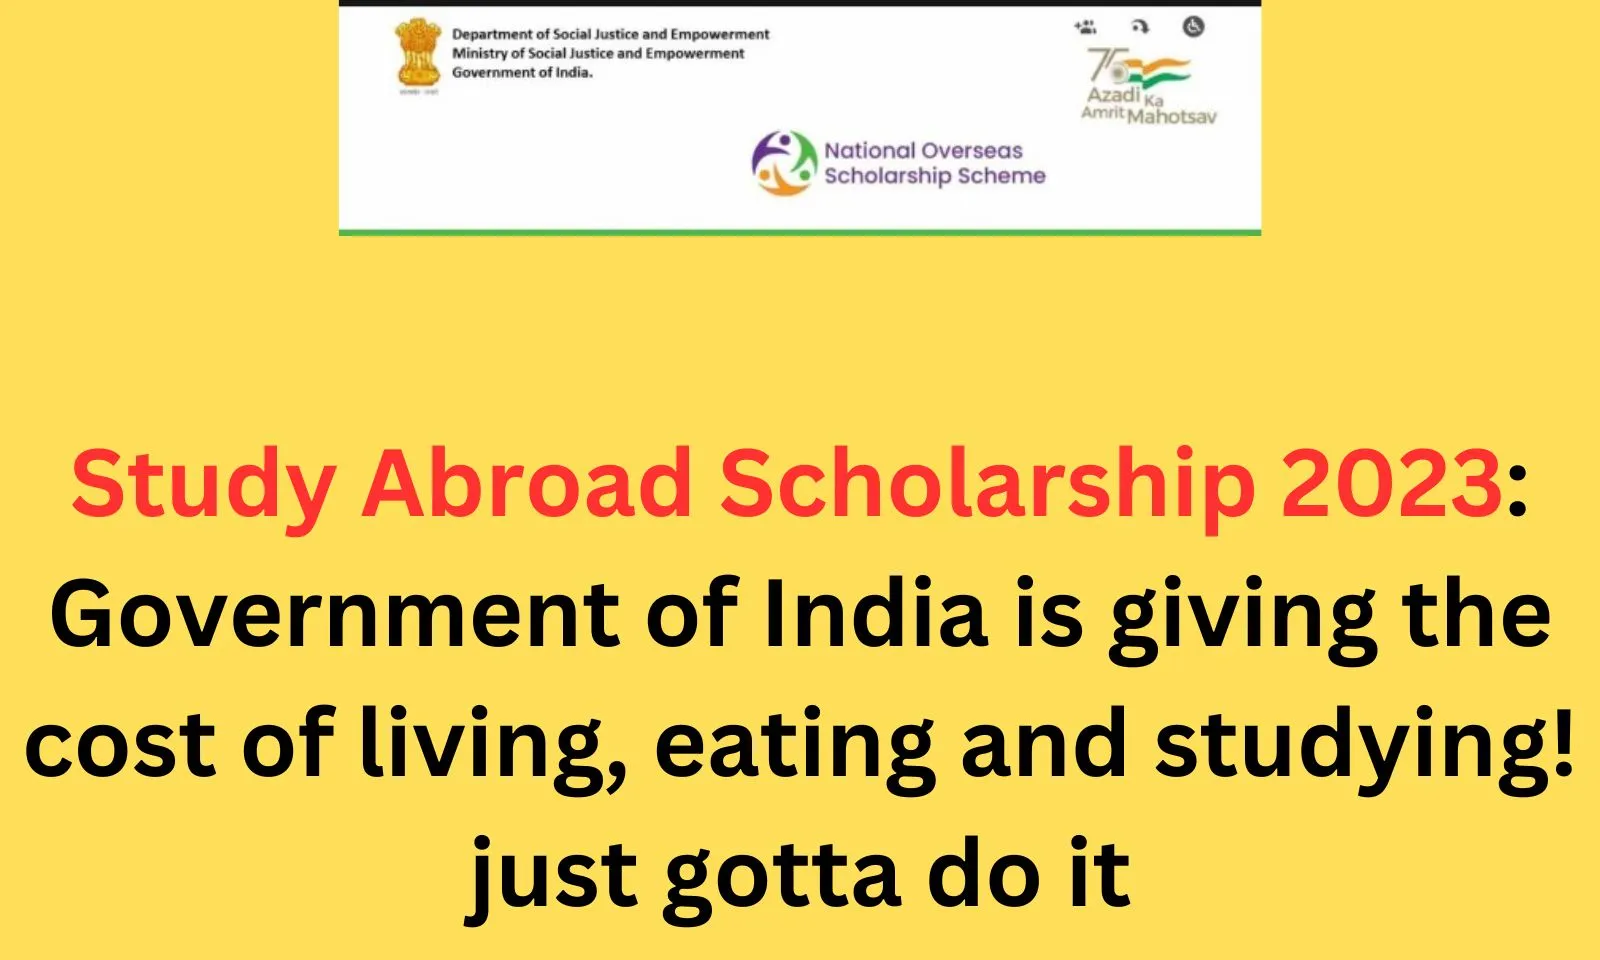 Study Abroad Scholarship 2023: Government of India is giving the cost of living, eating and studying! just gotta do it